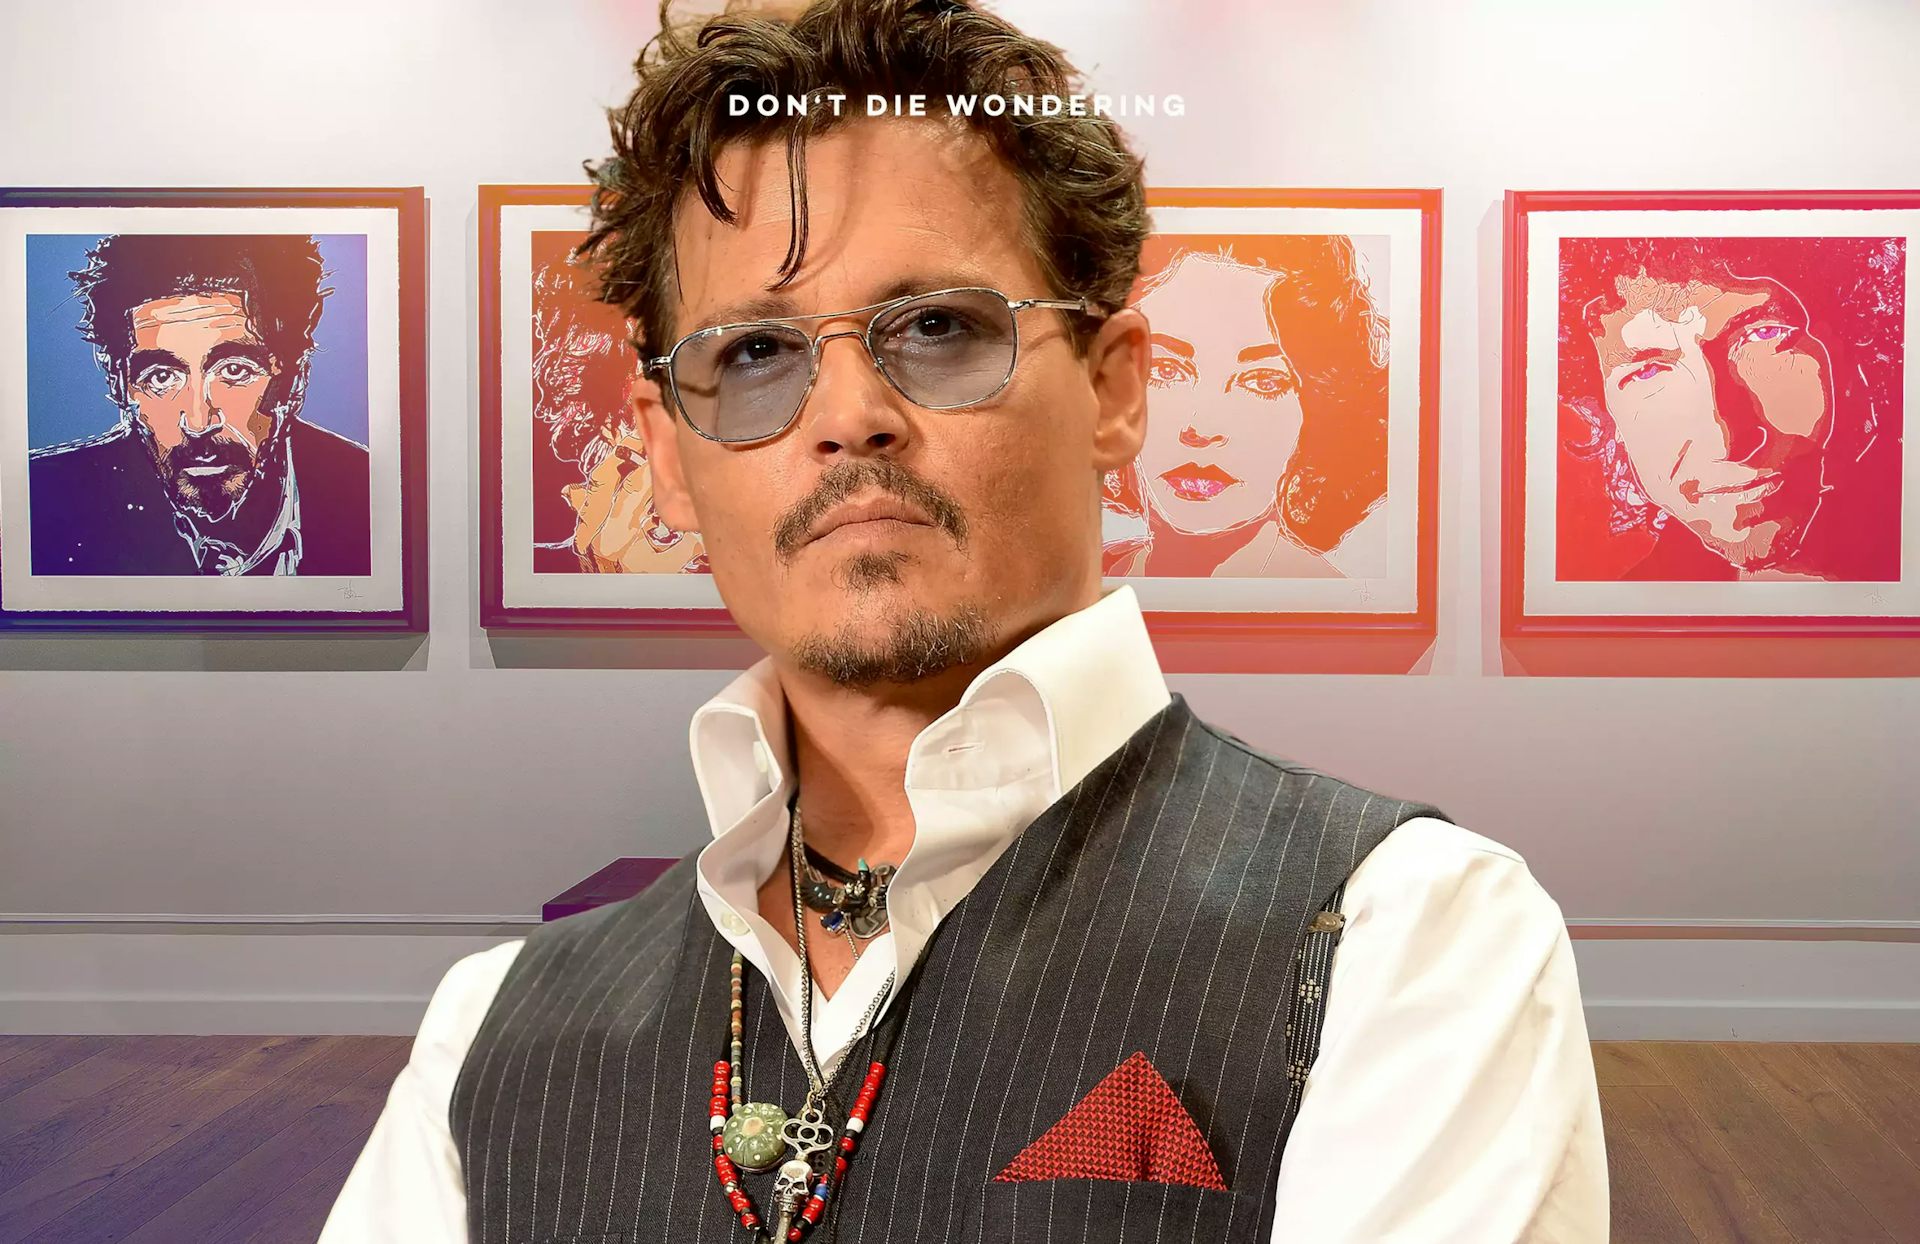 Johnny Depp’s Art “Friends & Heroes” Sells Out In Minutes